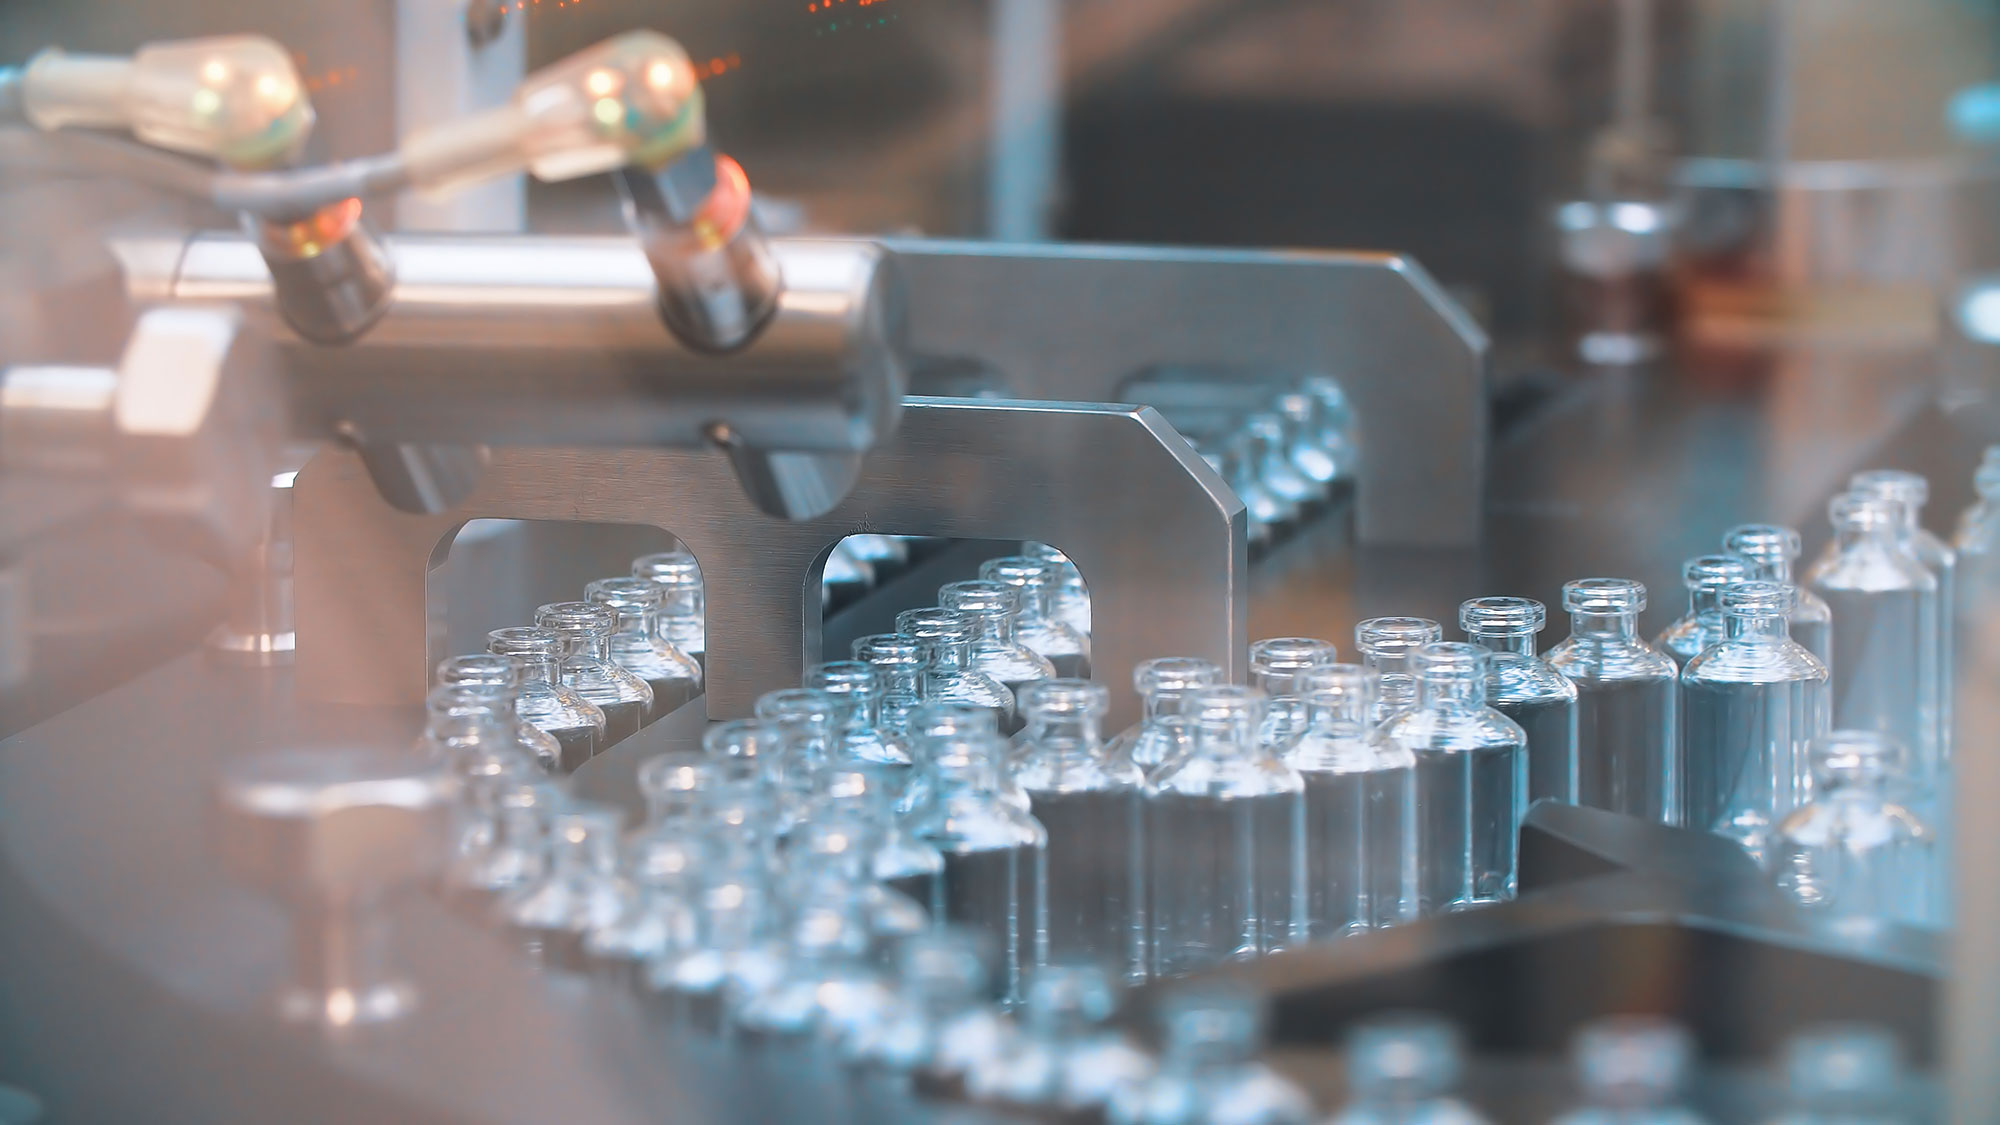 Tens of bottles on a production line in a manufacturing facility